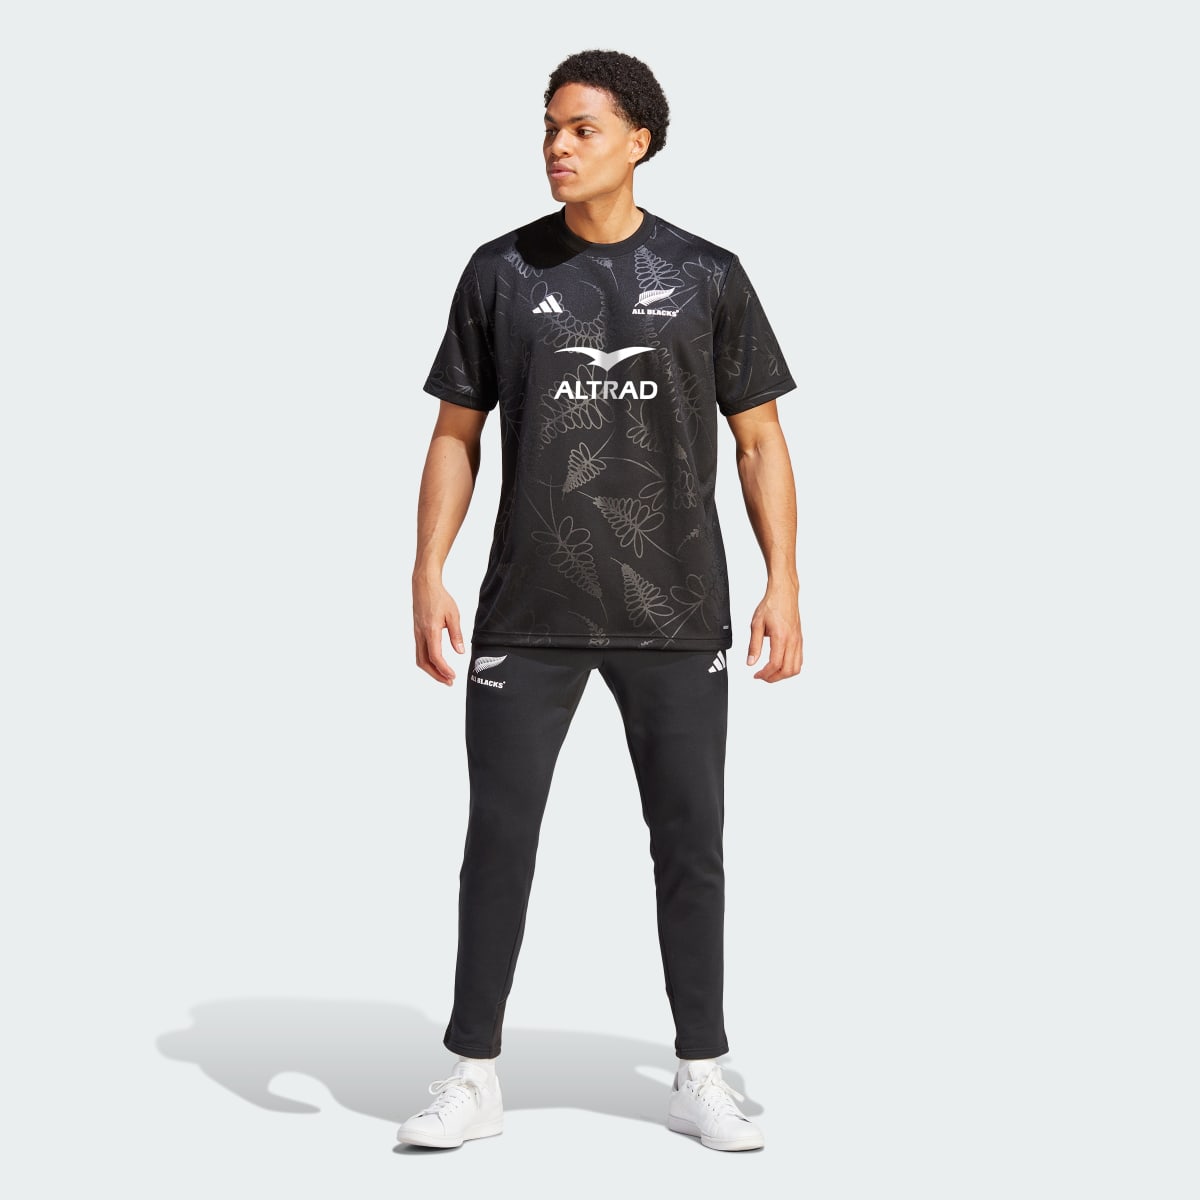 Adidas All Blacks Rugby Supporters T-Shirt. 6